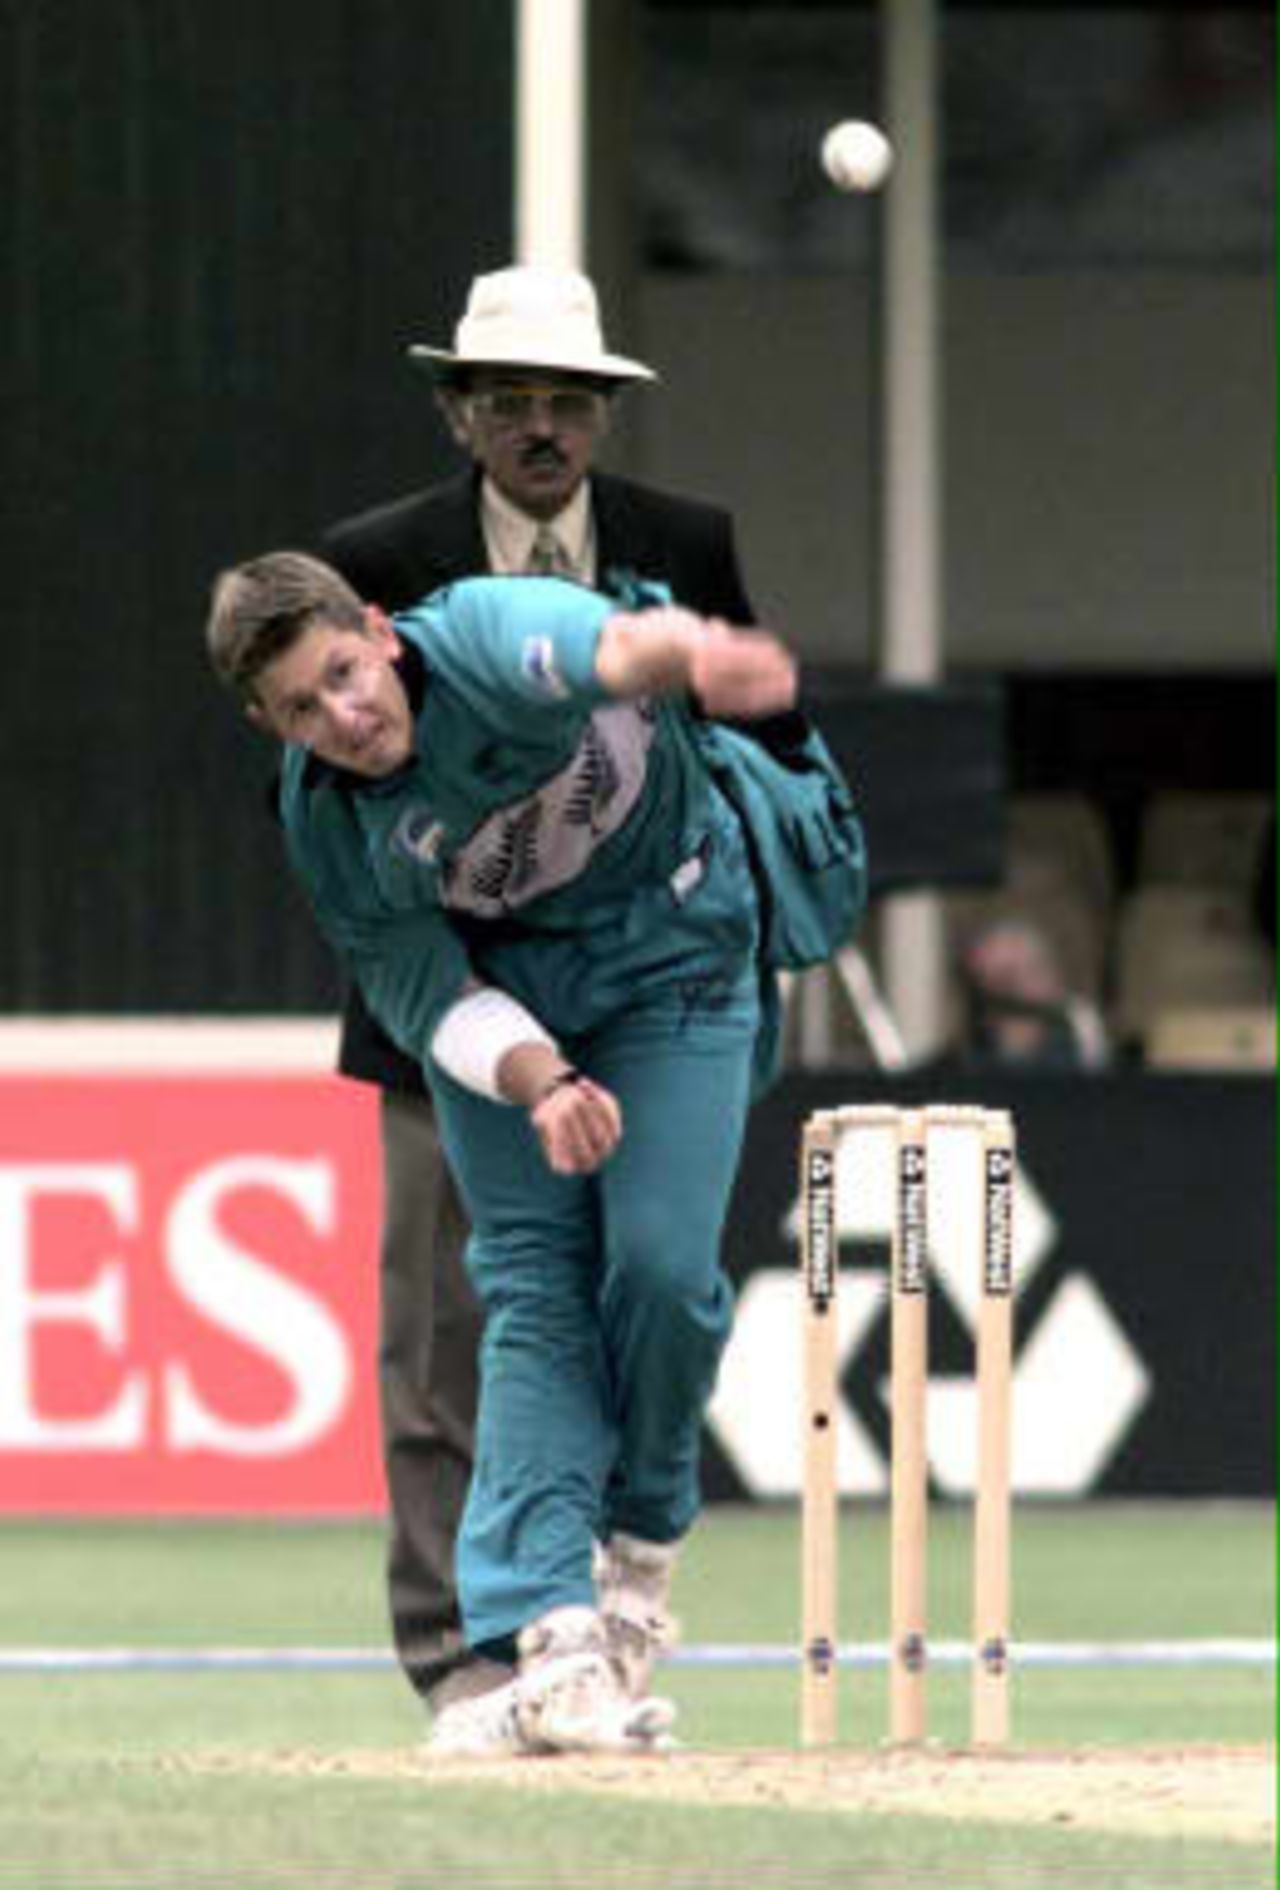 New Zealand's Geoff Allott in action 10 June 1999 during their Cricket World Cup Super Six match against South Africa at Edgbaston